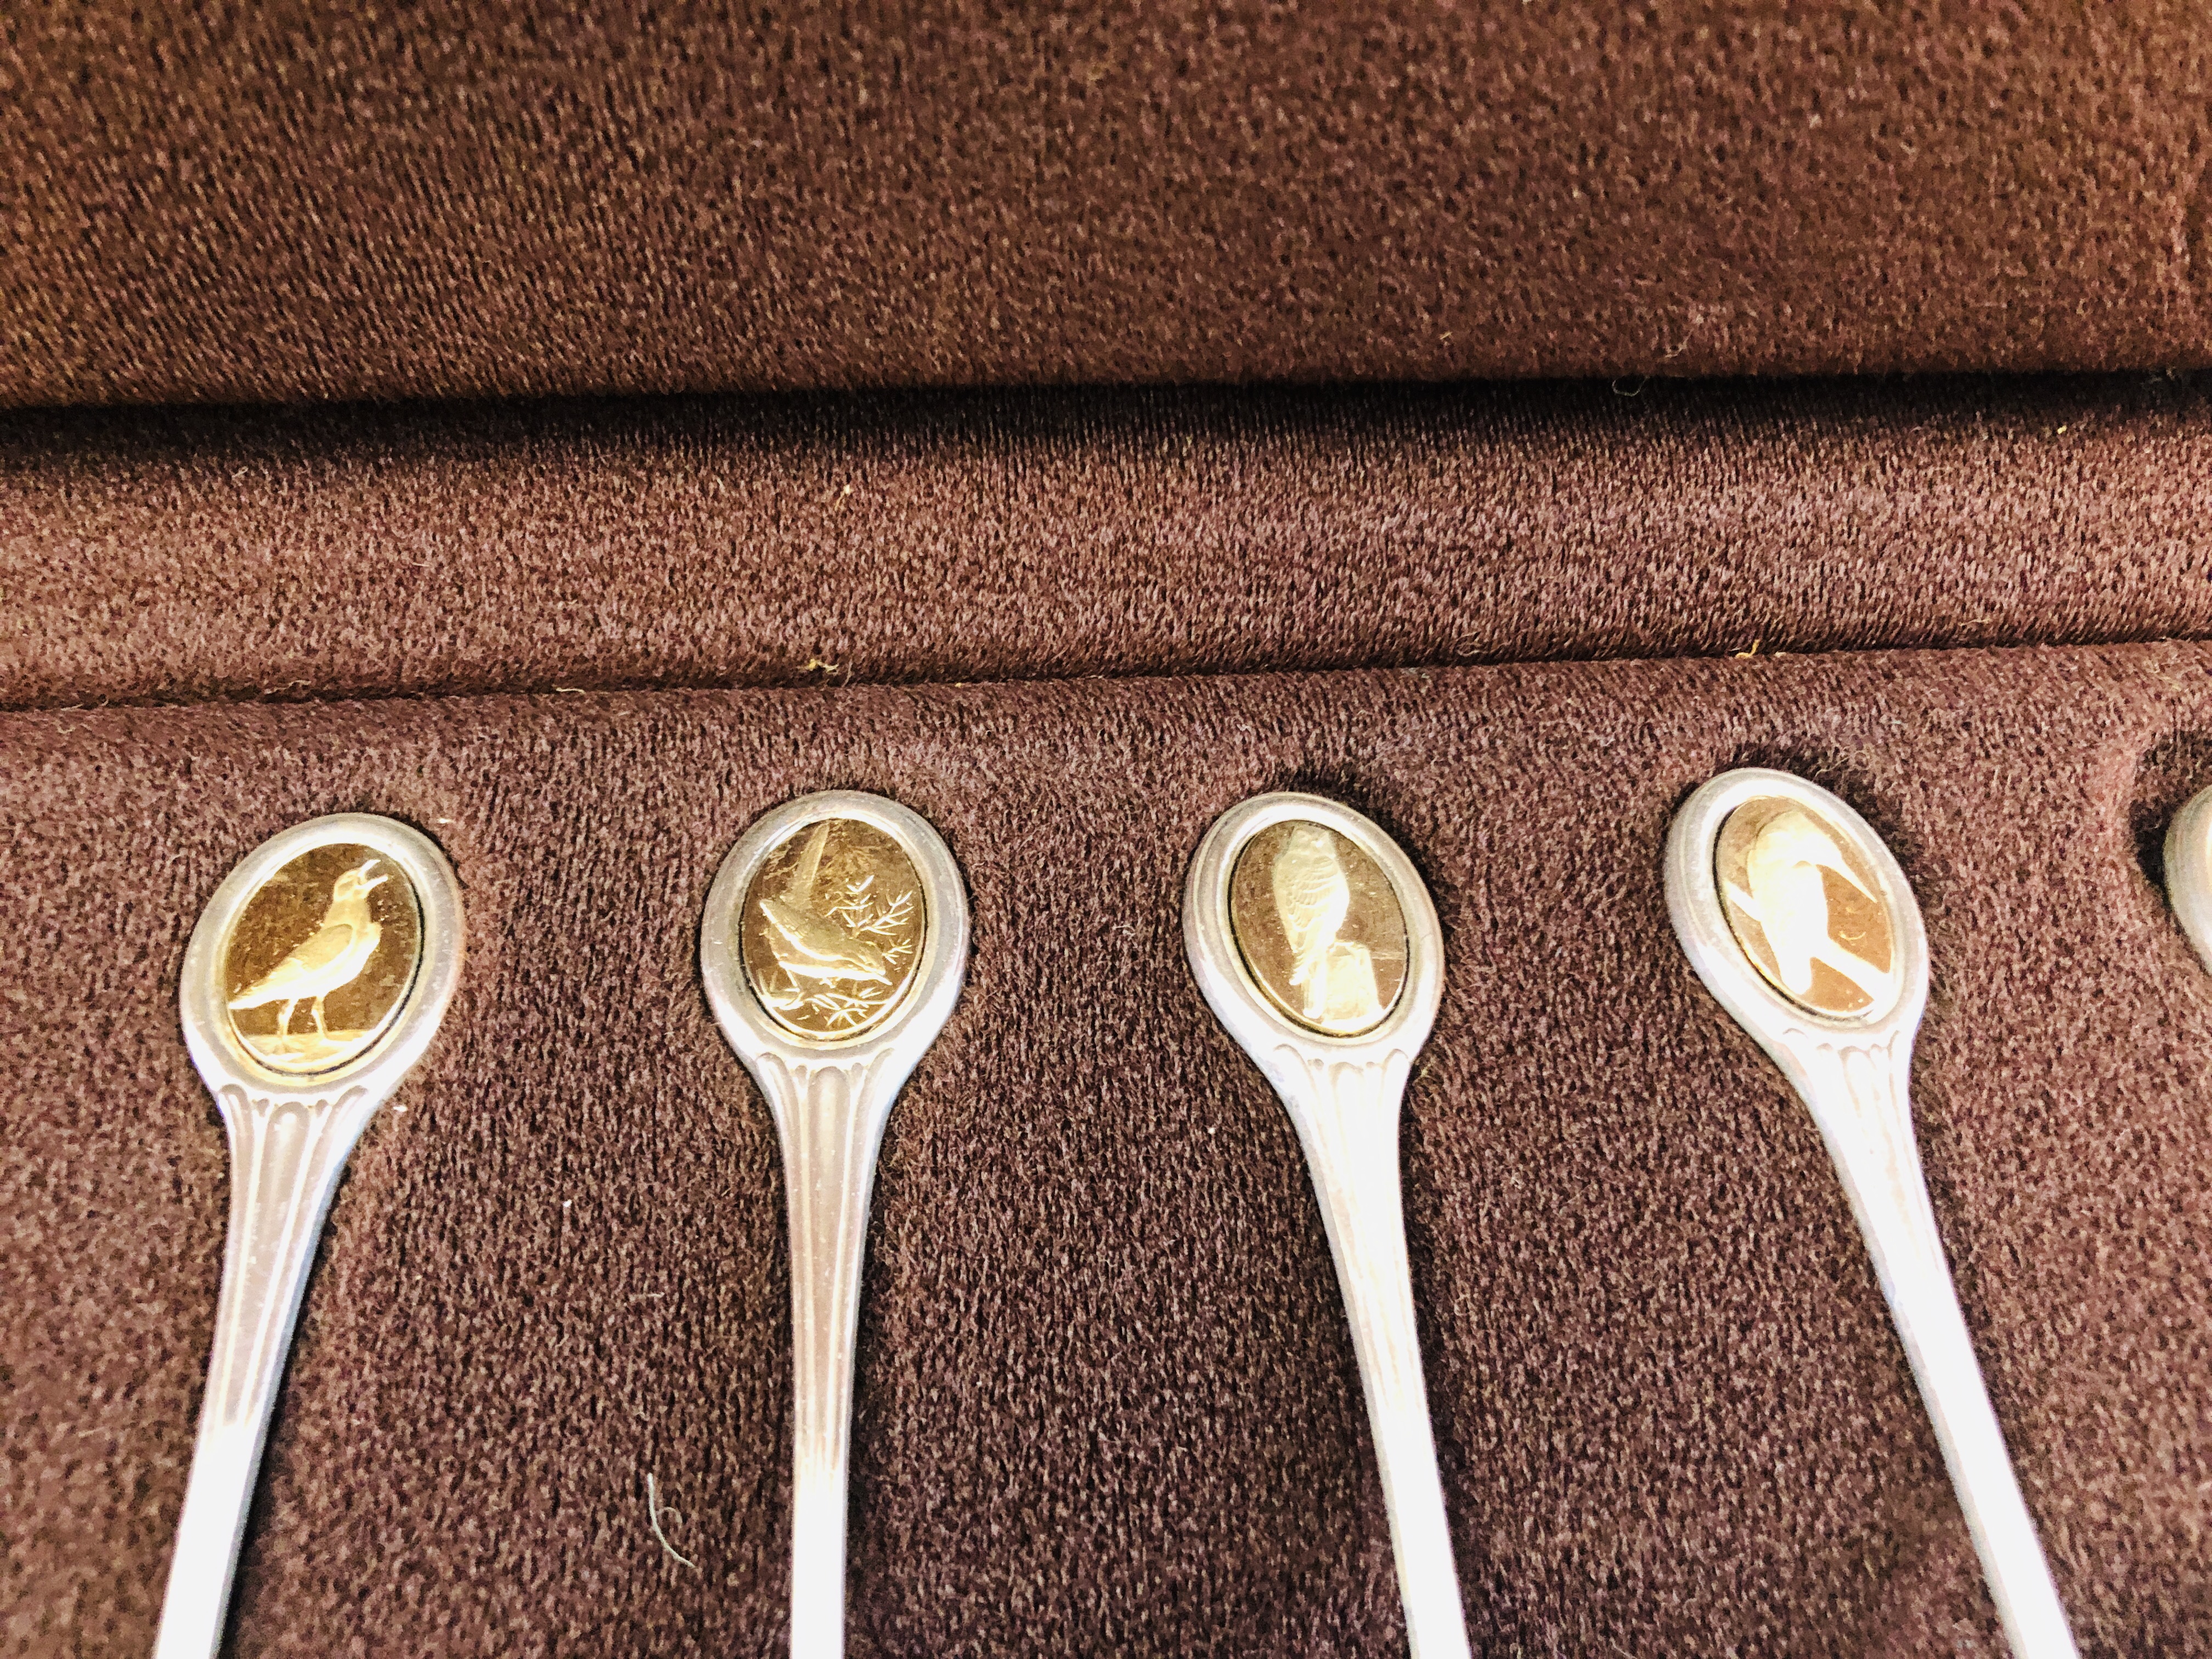 AN RSPB SILVER SPOON COLLECTION, J PINCHES LON 1975, 12 SPOONS. - Image 5 of 11